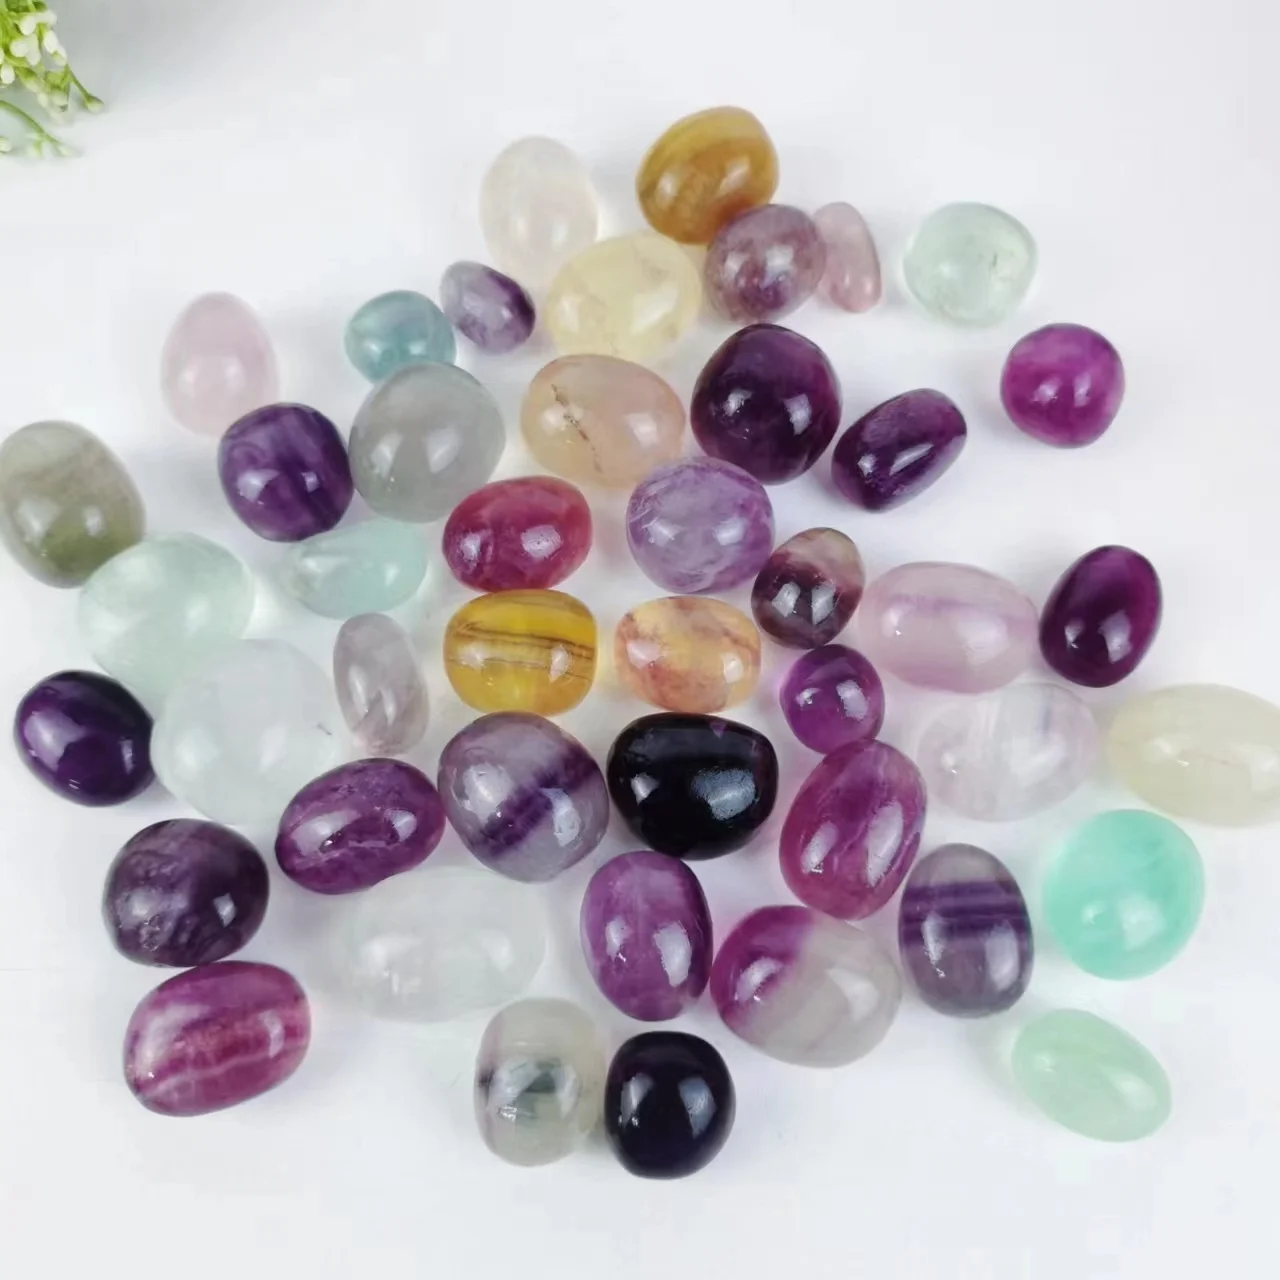 

Wholesale Crystal Healing Stones Candy Fluorite Tumble Rainbow Fluorite Tumble Stones For Decoration